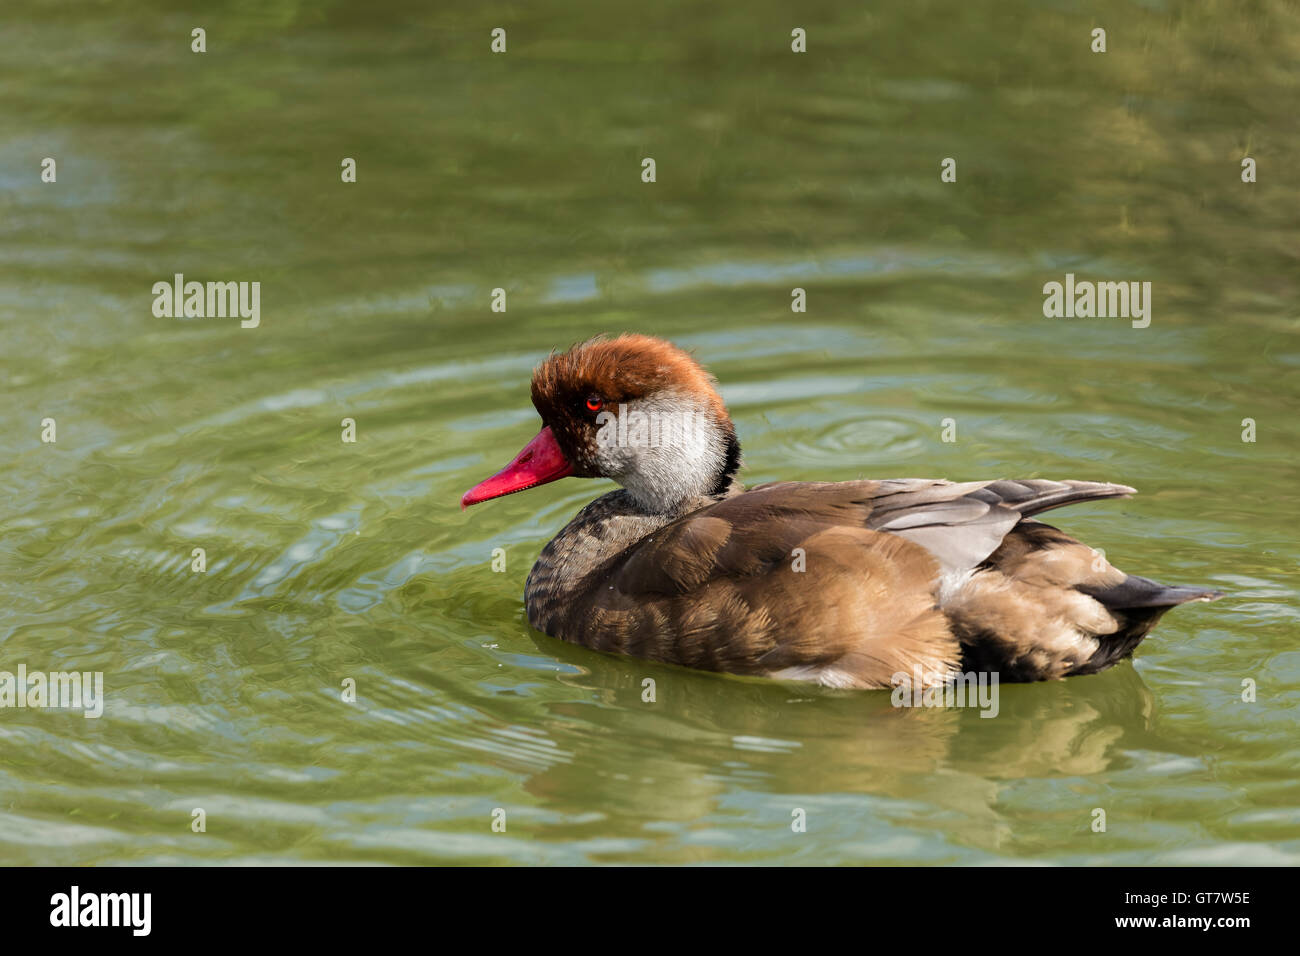 Duck of some sort with a bright red beak and brown head and feathers on the water Stock Photo